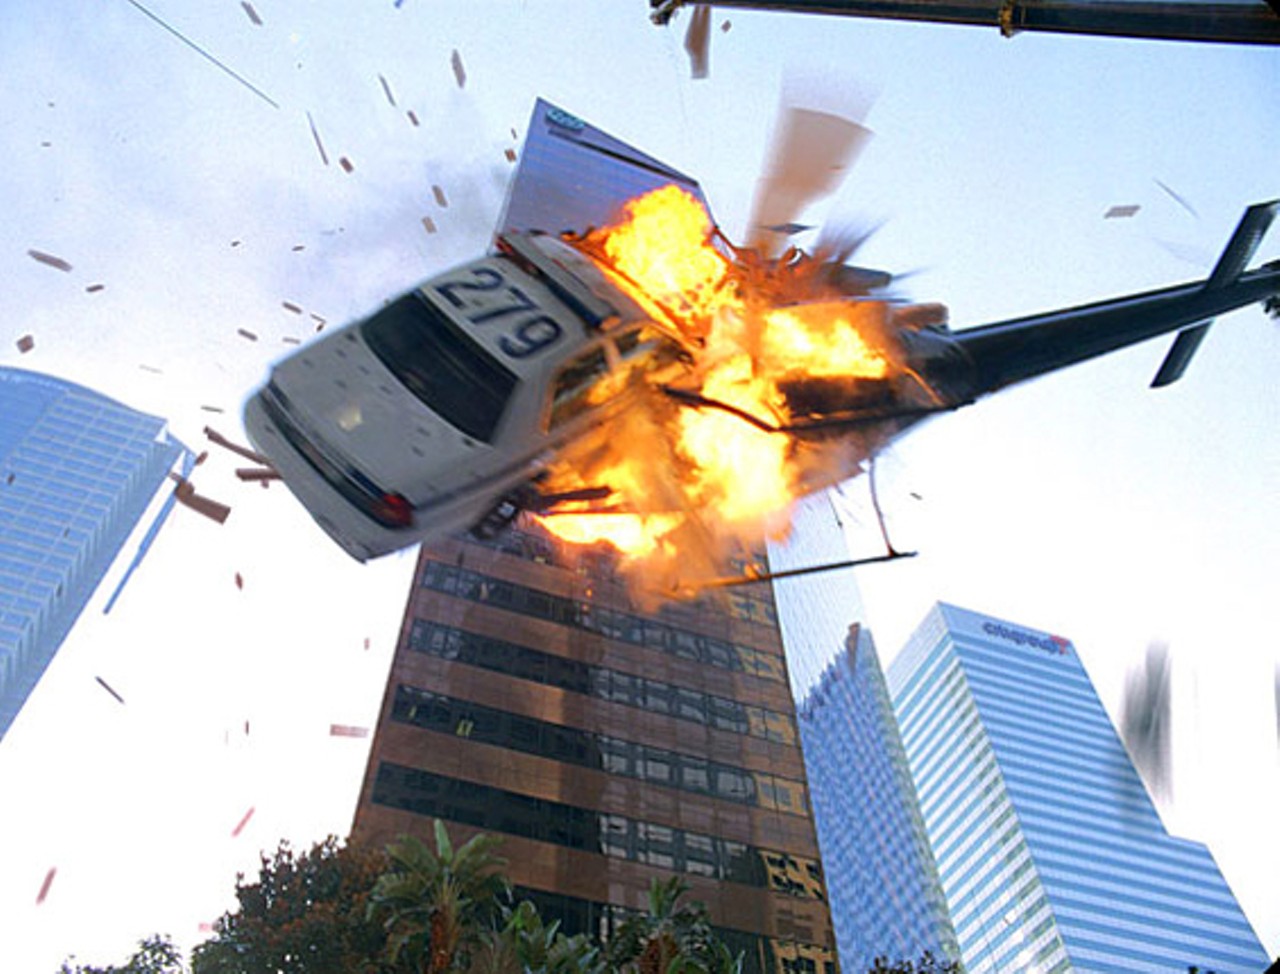 The third film in the franchise, Die Hard With a Vengeance, ends in yet another burning aeronautical vehicle -- this time, a helicopter. Inside are Hans Gruber, Simon's younger brother, and his lover/partner-in-crime Katya (Sam Phillips), who is Ukrainian and mute. Which means there is no screaming from Katya when McClane shoots a wire that catches in the helicopter blades and sends it plummeting. In honor of Katya&rsquo;s death and her inability to make a fuss about it, we suggest the alternate movie title A Long Die Hard&rsquo;s Journey Into Night.